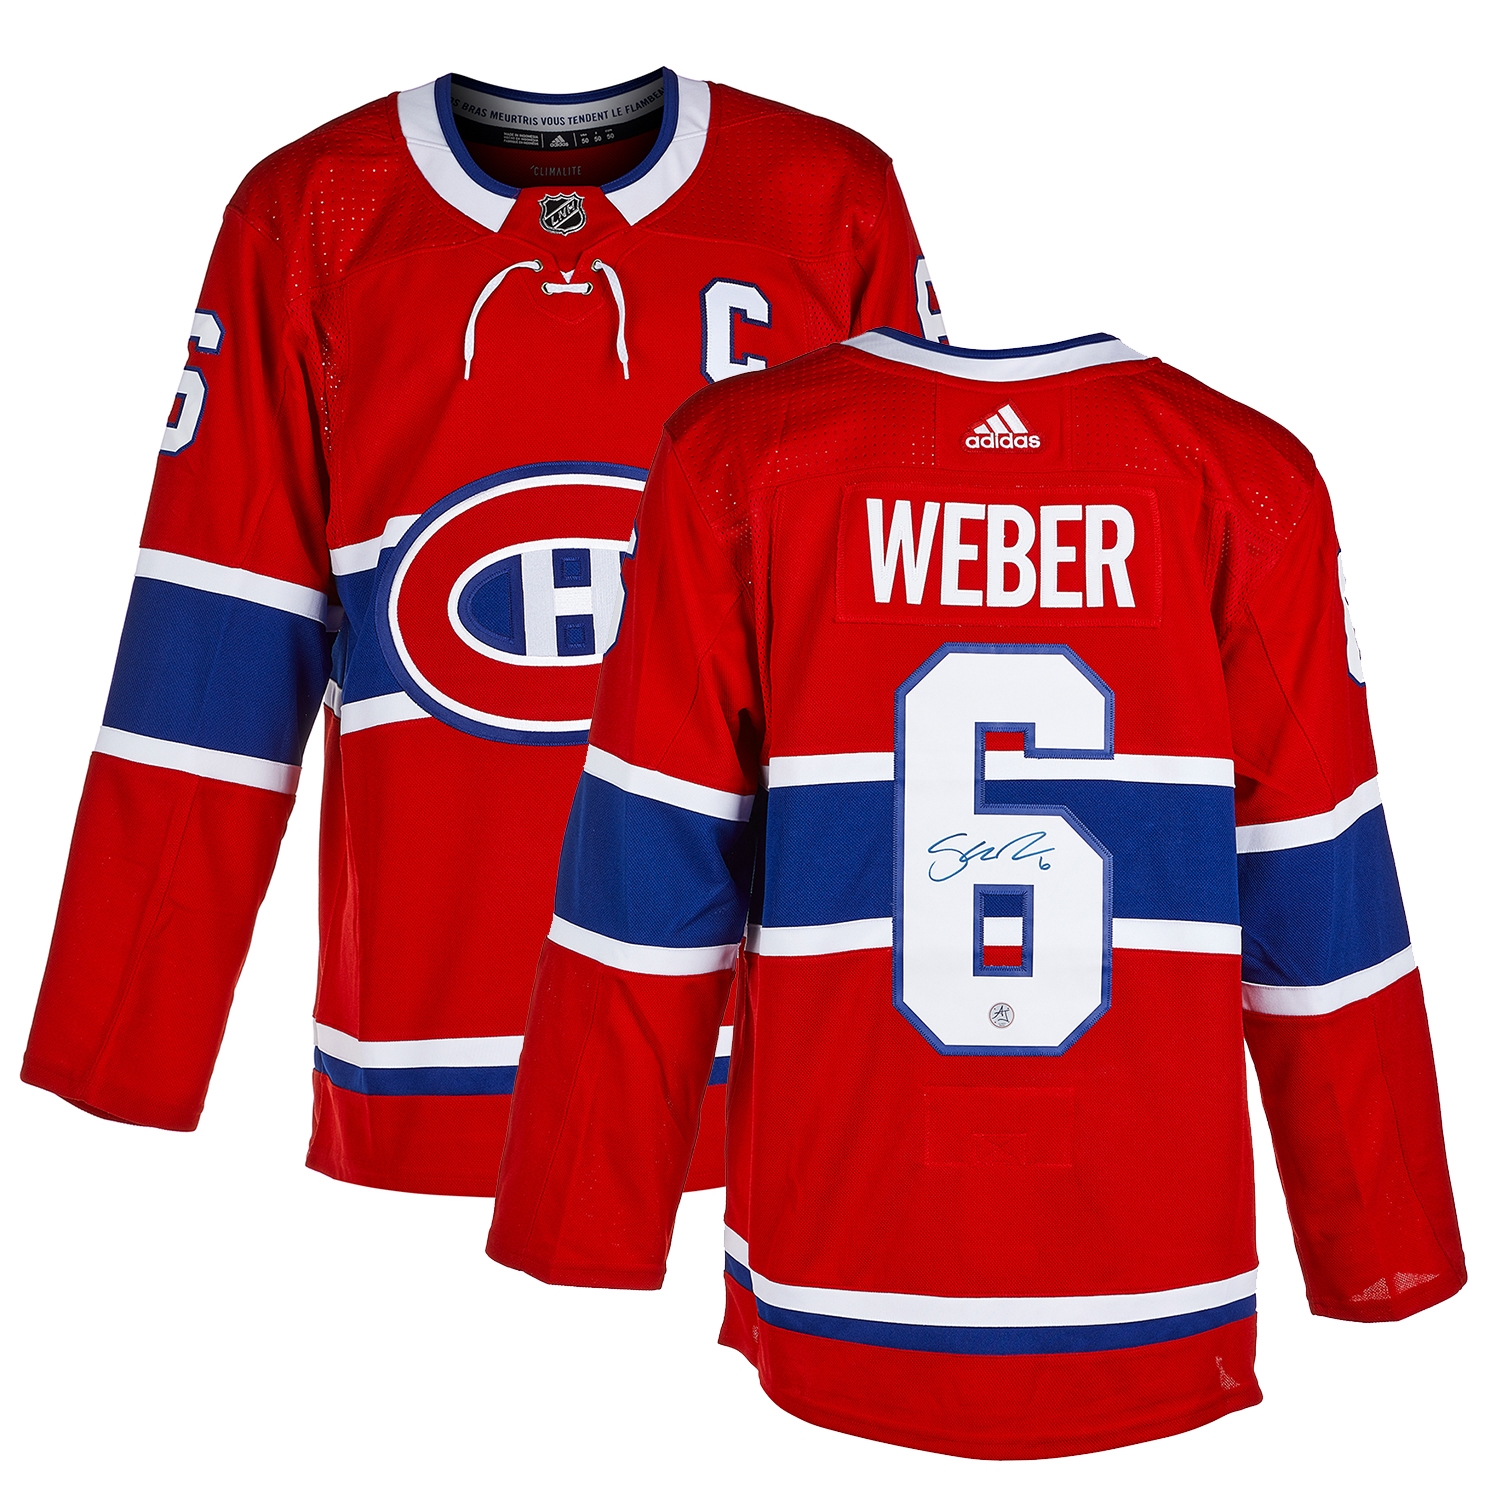 Shea Weber Autographed Montreal Canadiens adidas Jersey